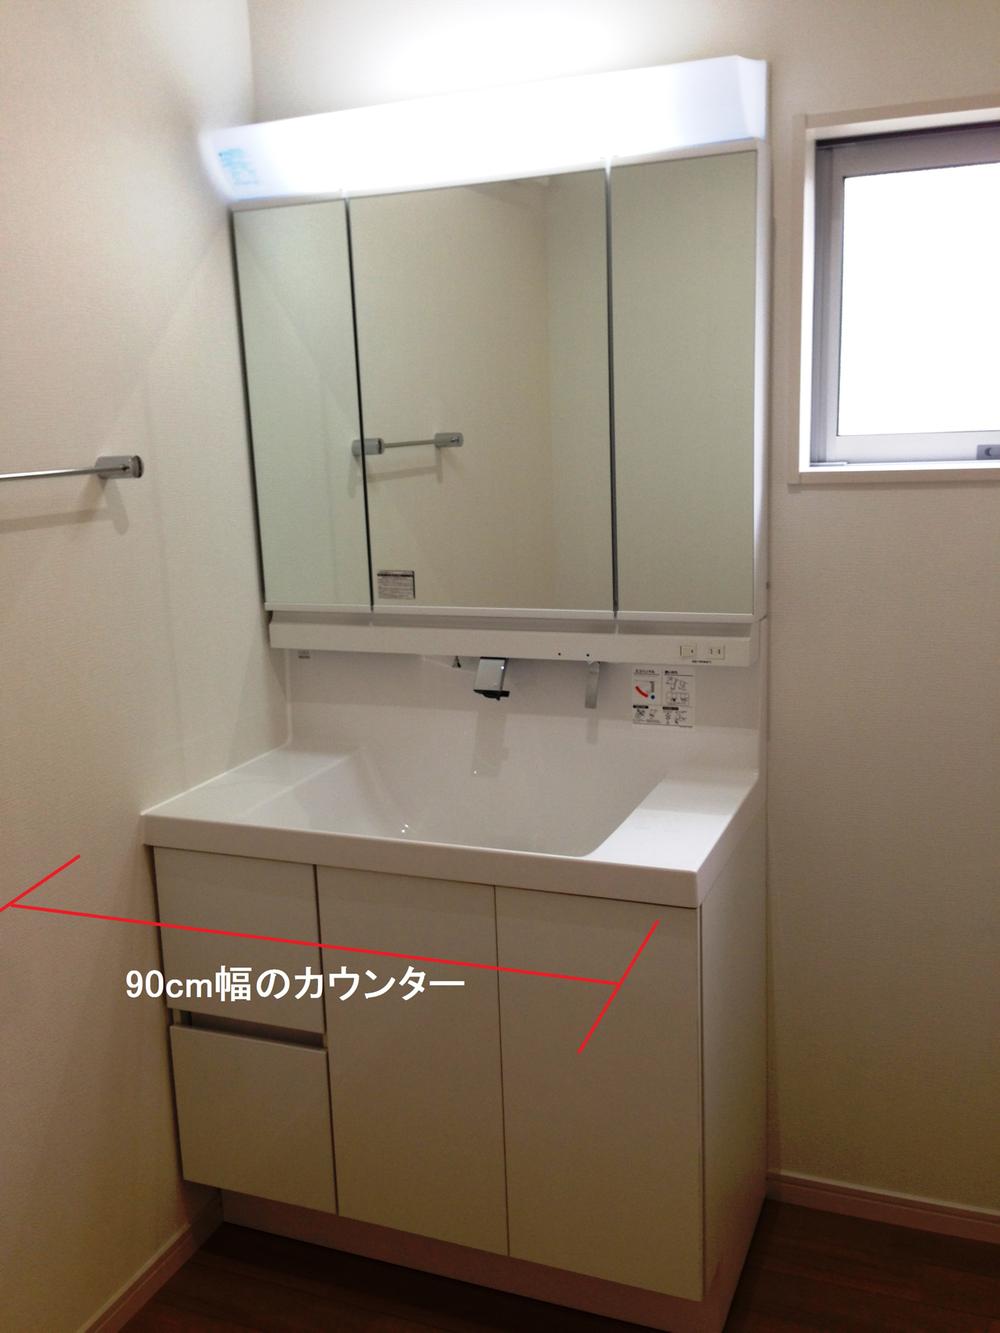 Wash basin, toilet. Since the counter of 90cm width, And put a lot of small items, It can also be used by two people